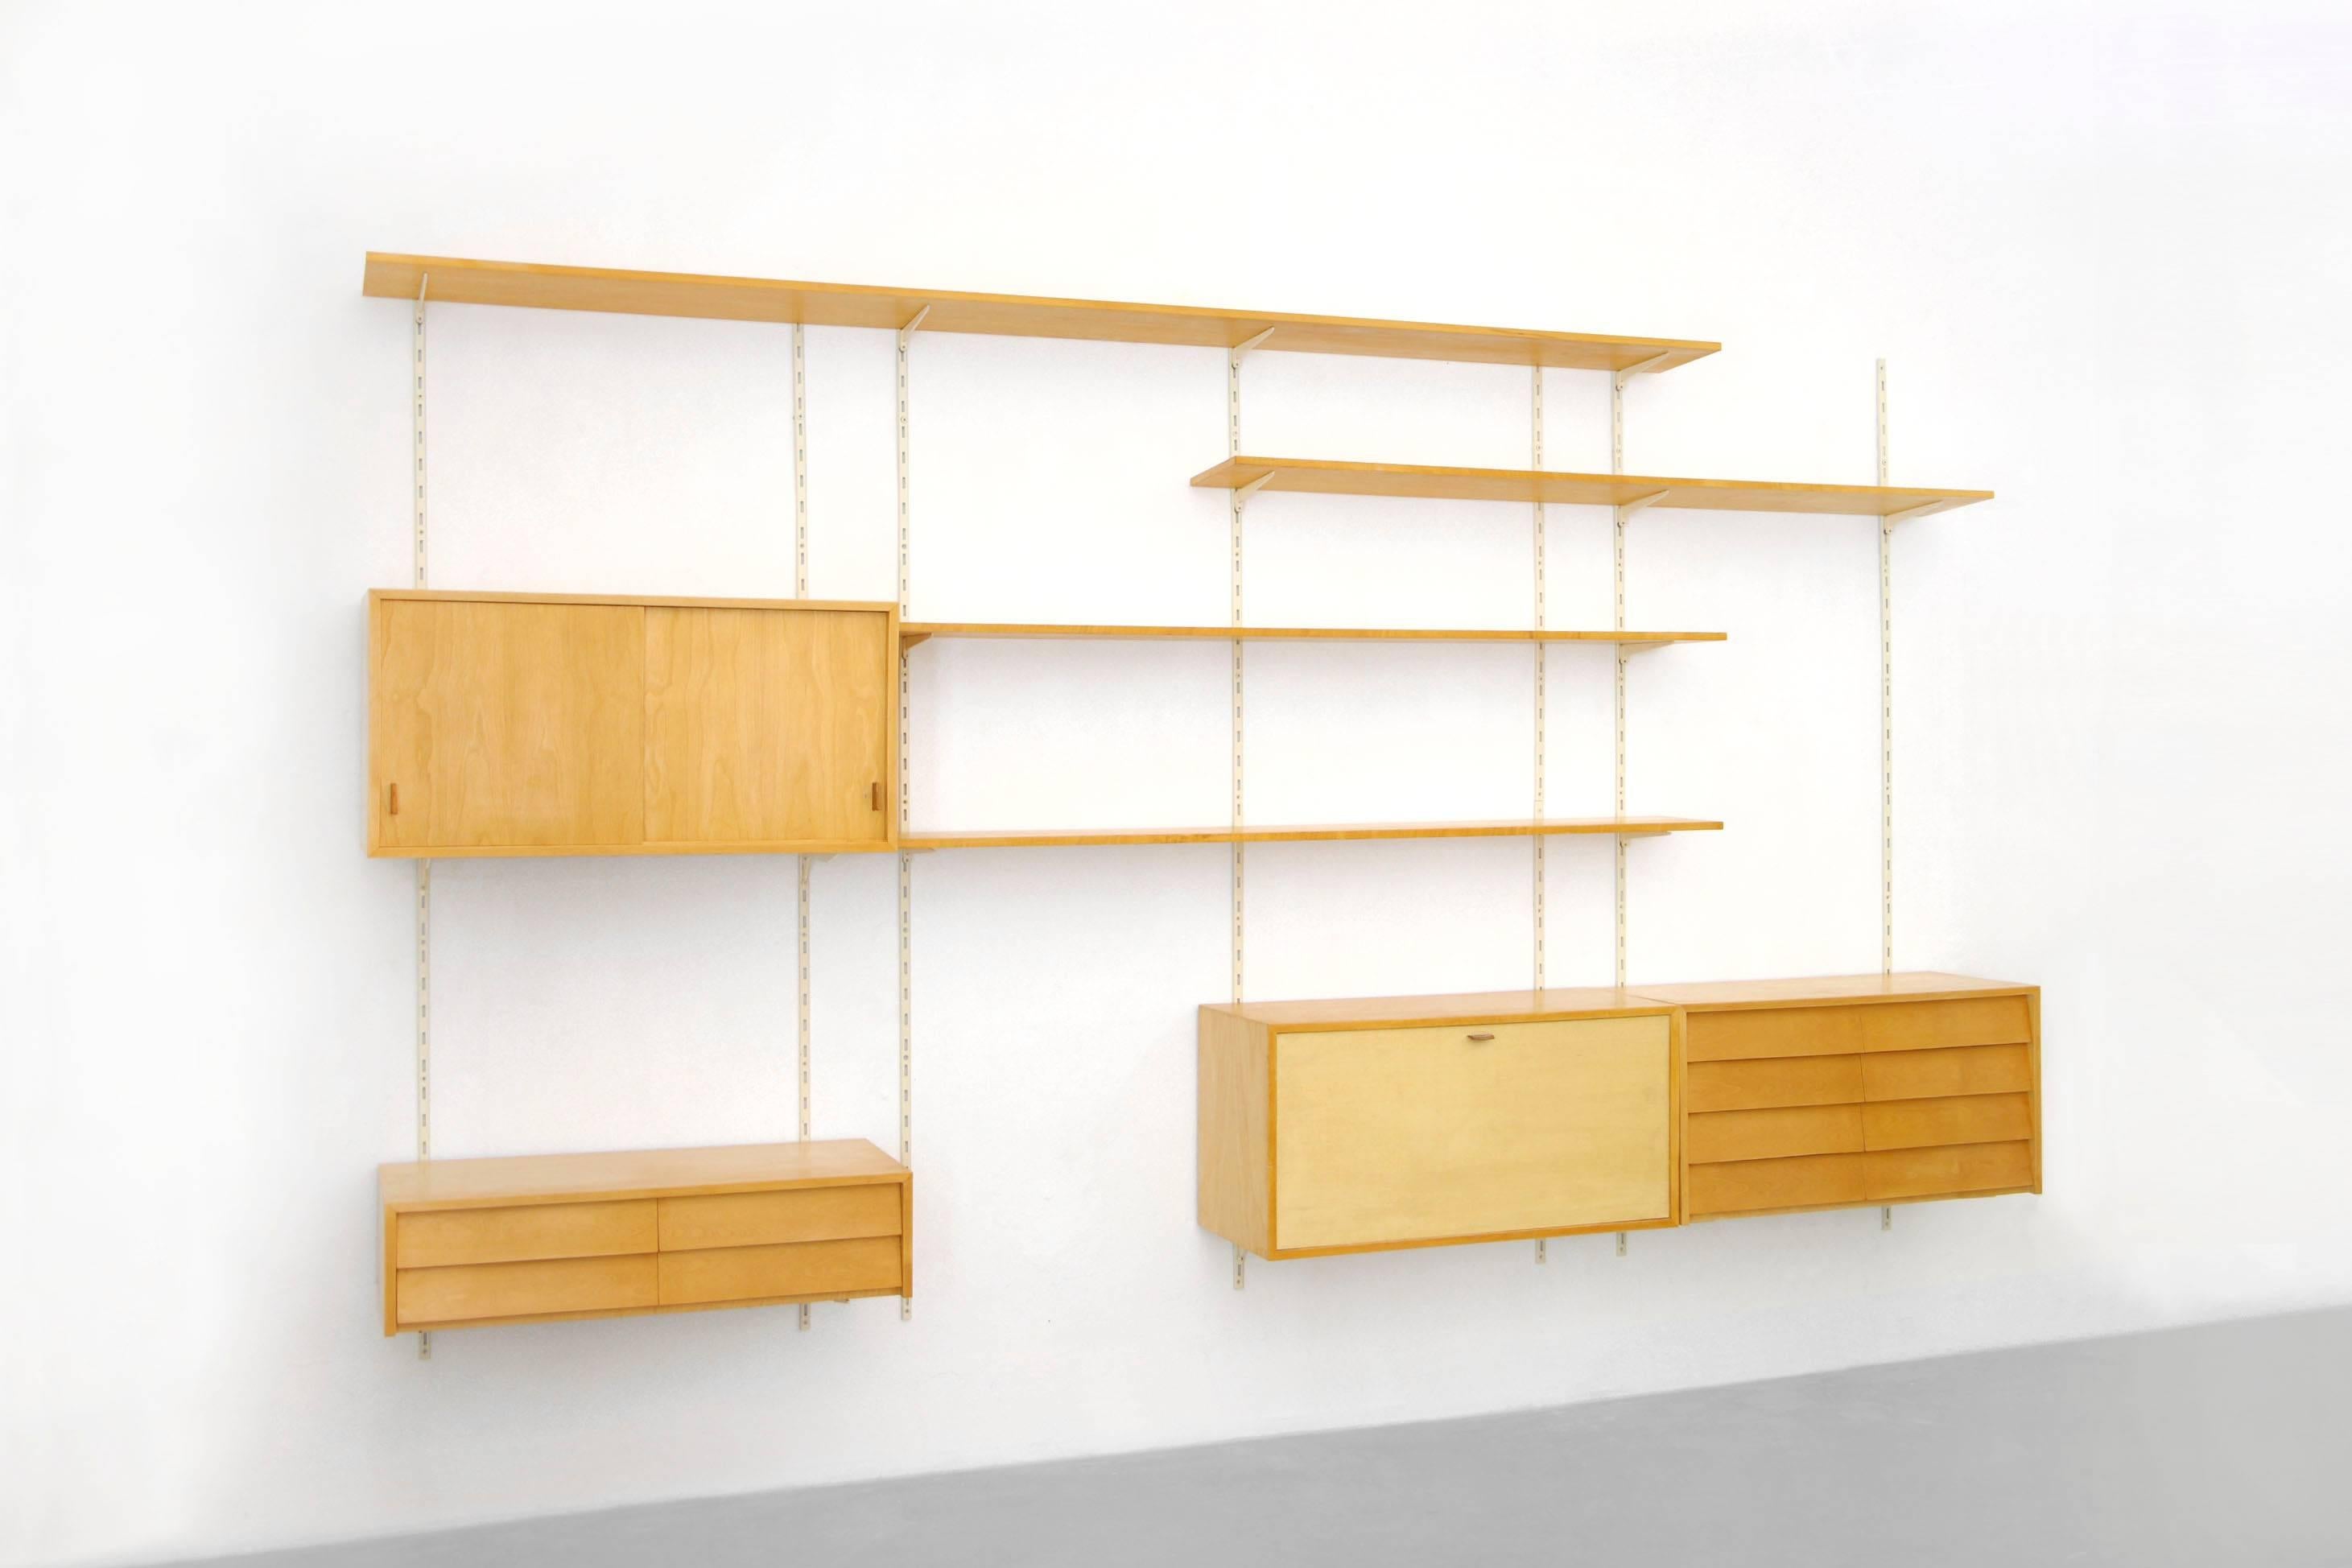 Rarely seen shelving system by Florence Knoll.
This system can be arranged in different variations.
The condition is good, despite age and use. The clapdoor cabinet was restored.
We have five small shelves in stock which are on top to this offer.